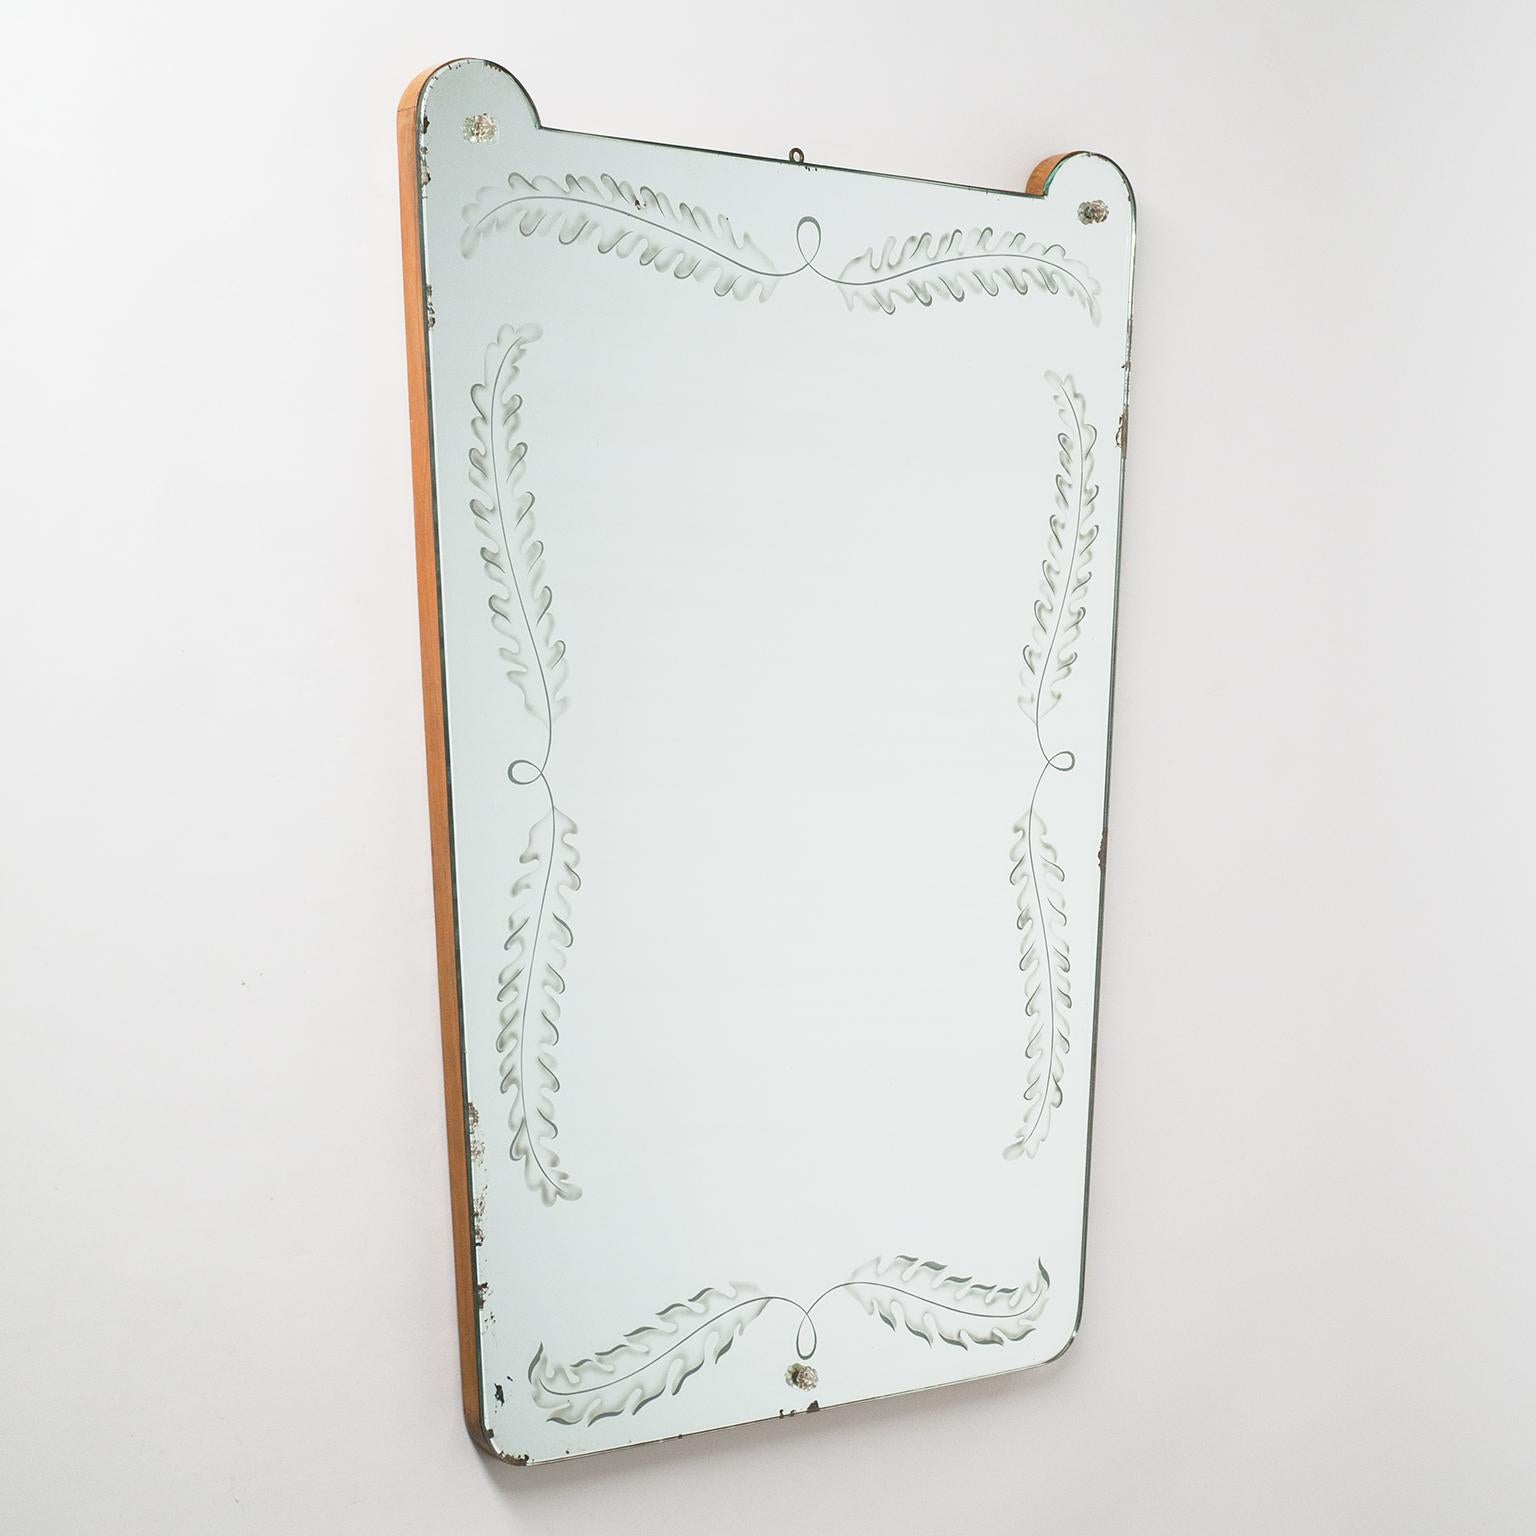 Rare Italian 1930s mirror with etched and sand-blasted decorations. These floral decorations are beautifully executed with gradients and feathered edges, much in the manner of designs by Pietro Chiesa and Gio Ponti, which were produced by Fontana